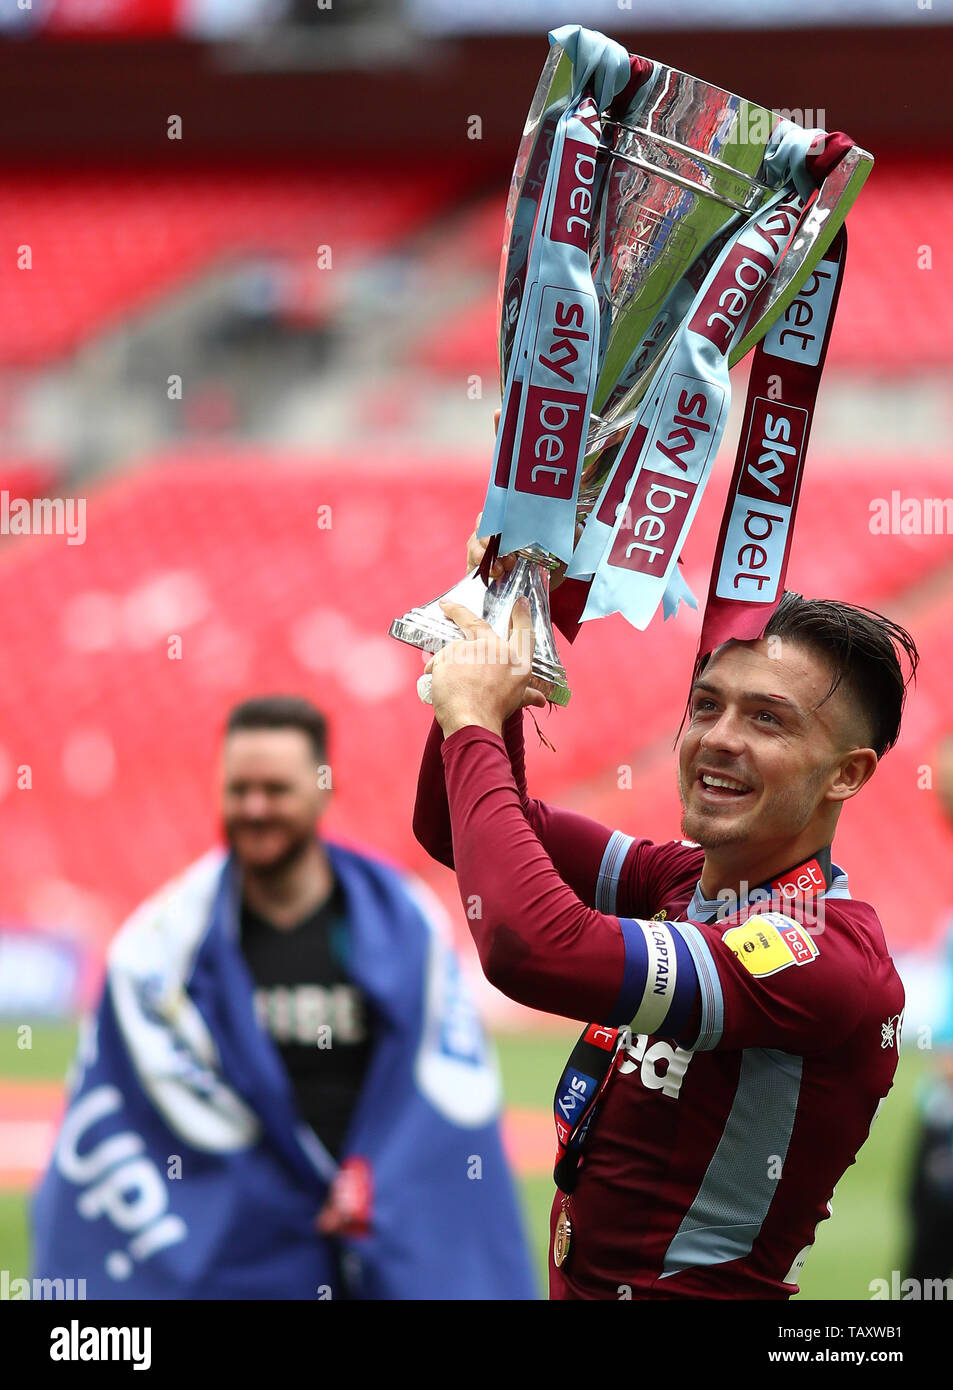 Jack Grealish of Aston Villa celebrates with the trophy - Aston Villa v Derby County, Sky Bet Championship Play-Off Final, Wembley Stadium, London - 27th May 2019  Editorial Use Only - DataCo restrictions apply Stock Photo